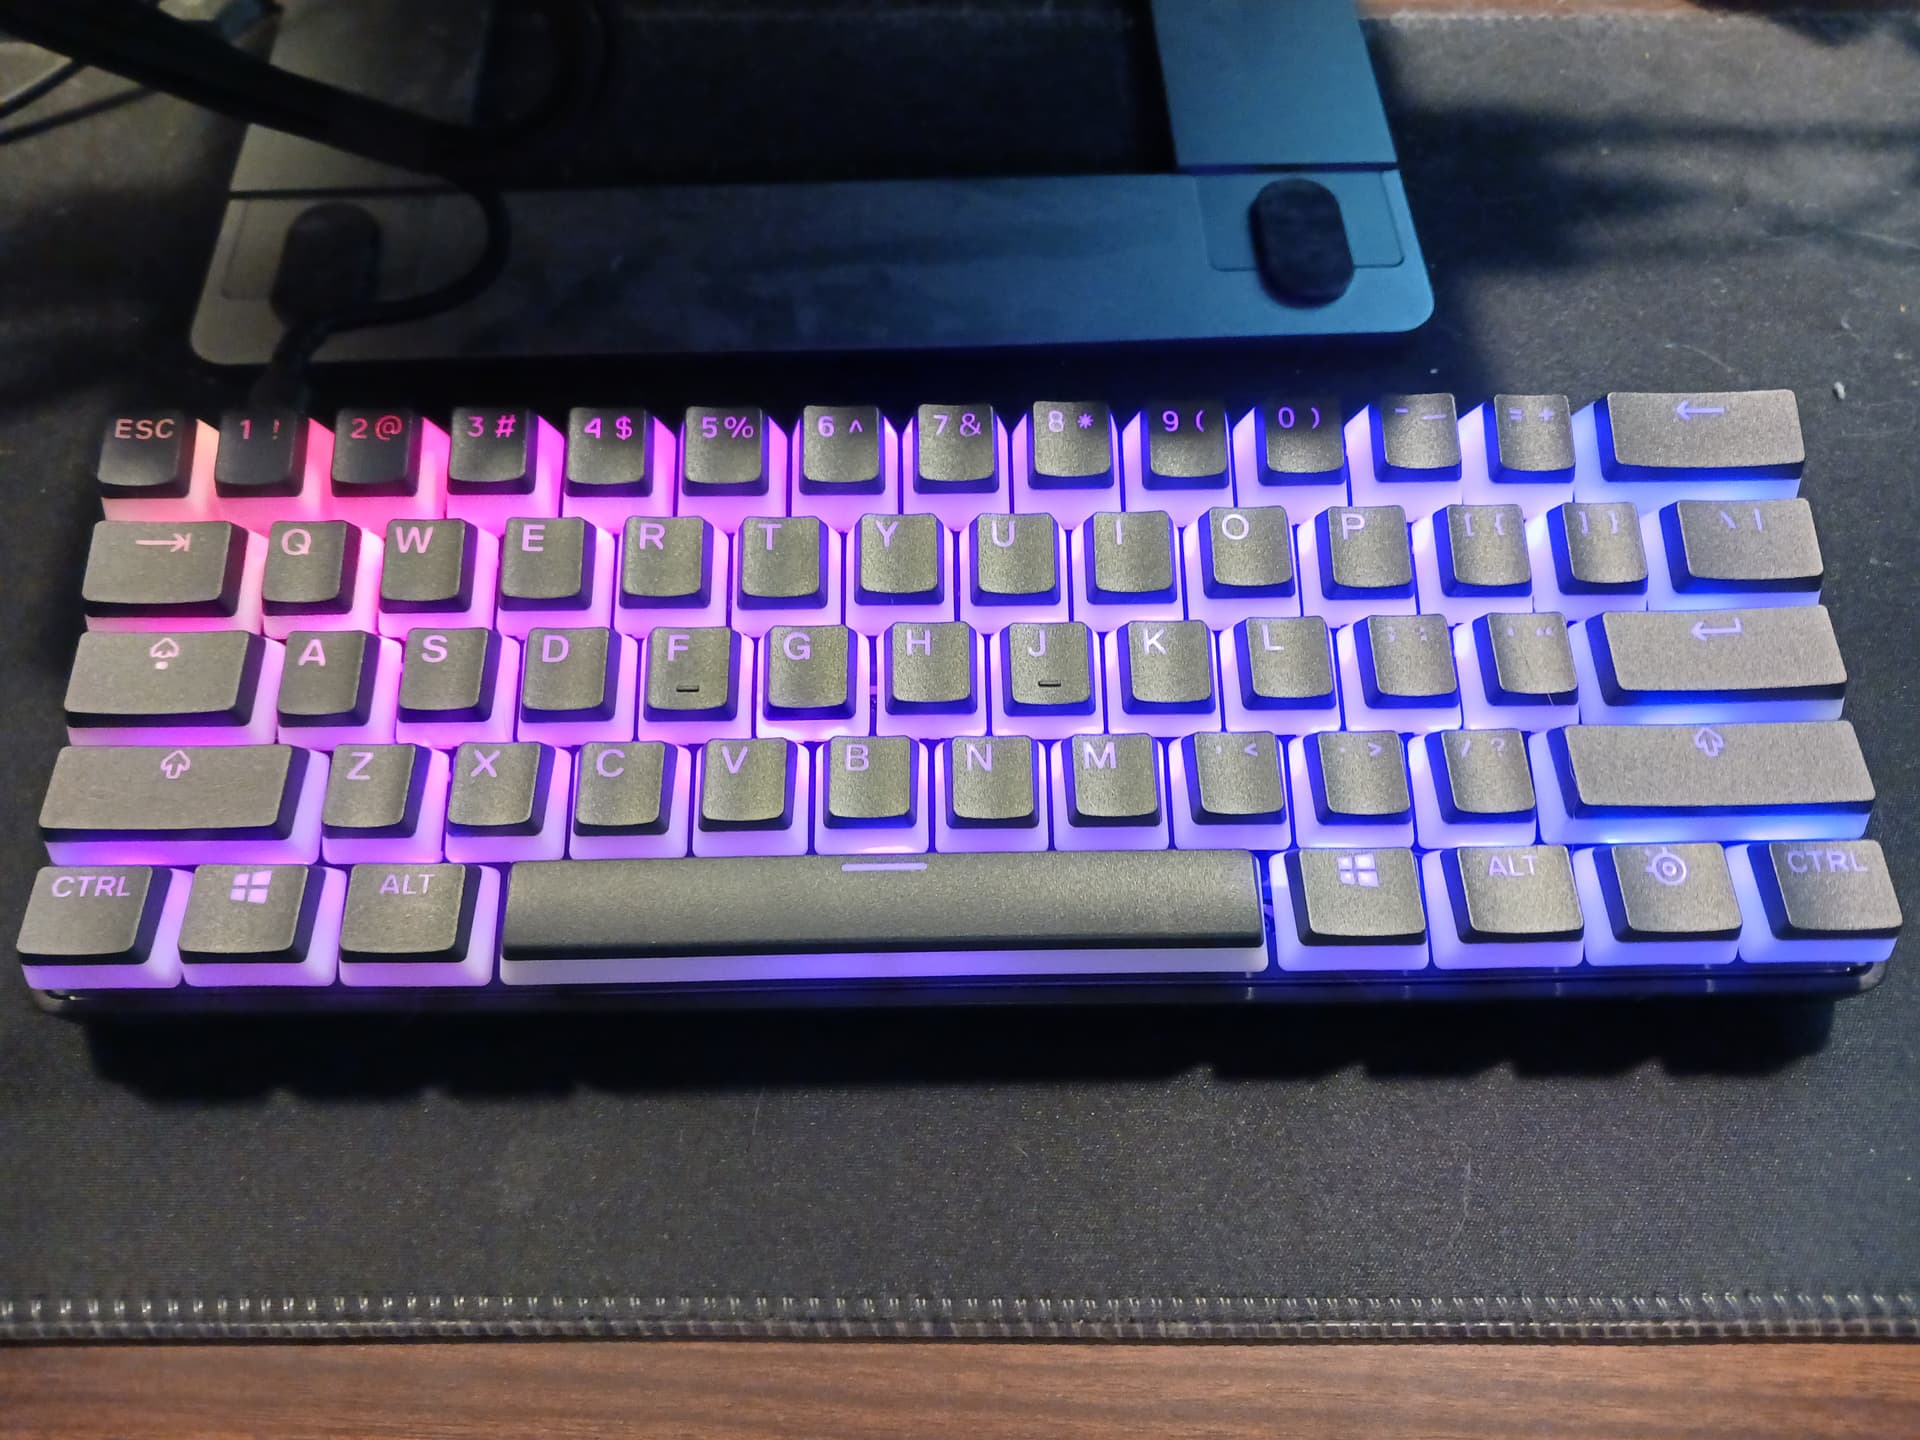 Apex 9 Mini with lubed switches and stabs, prism keycaps, and band